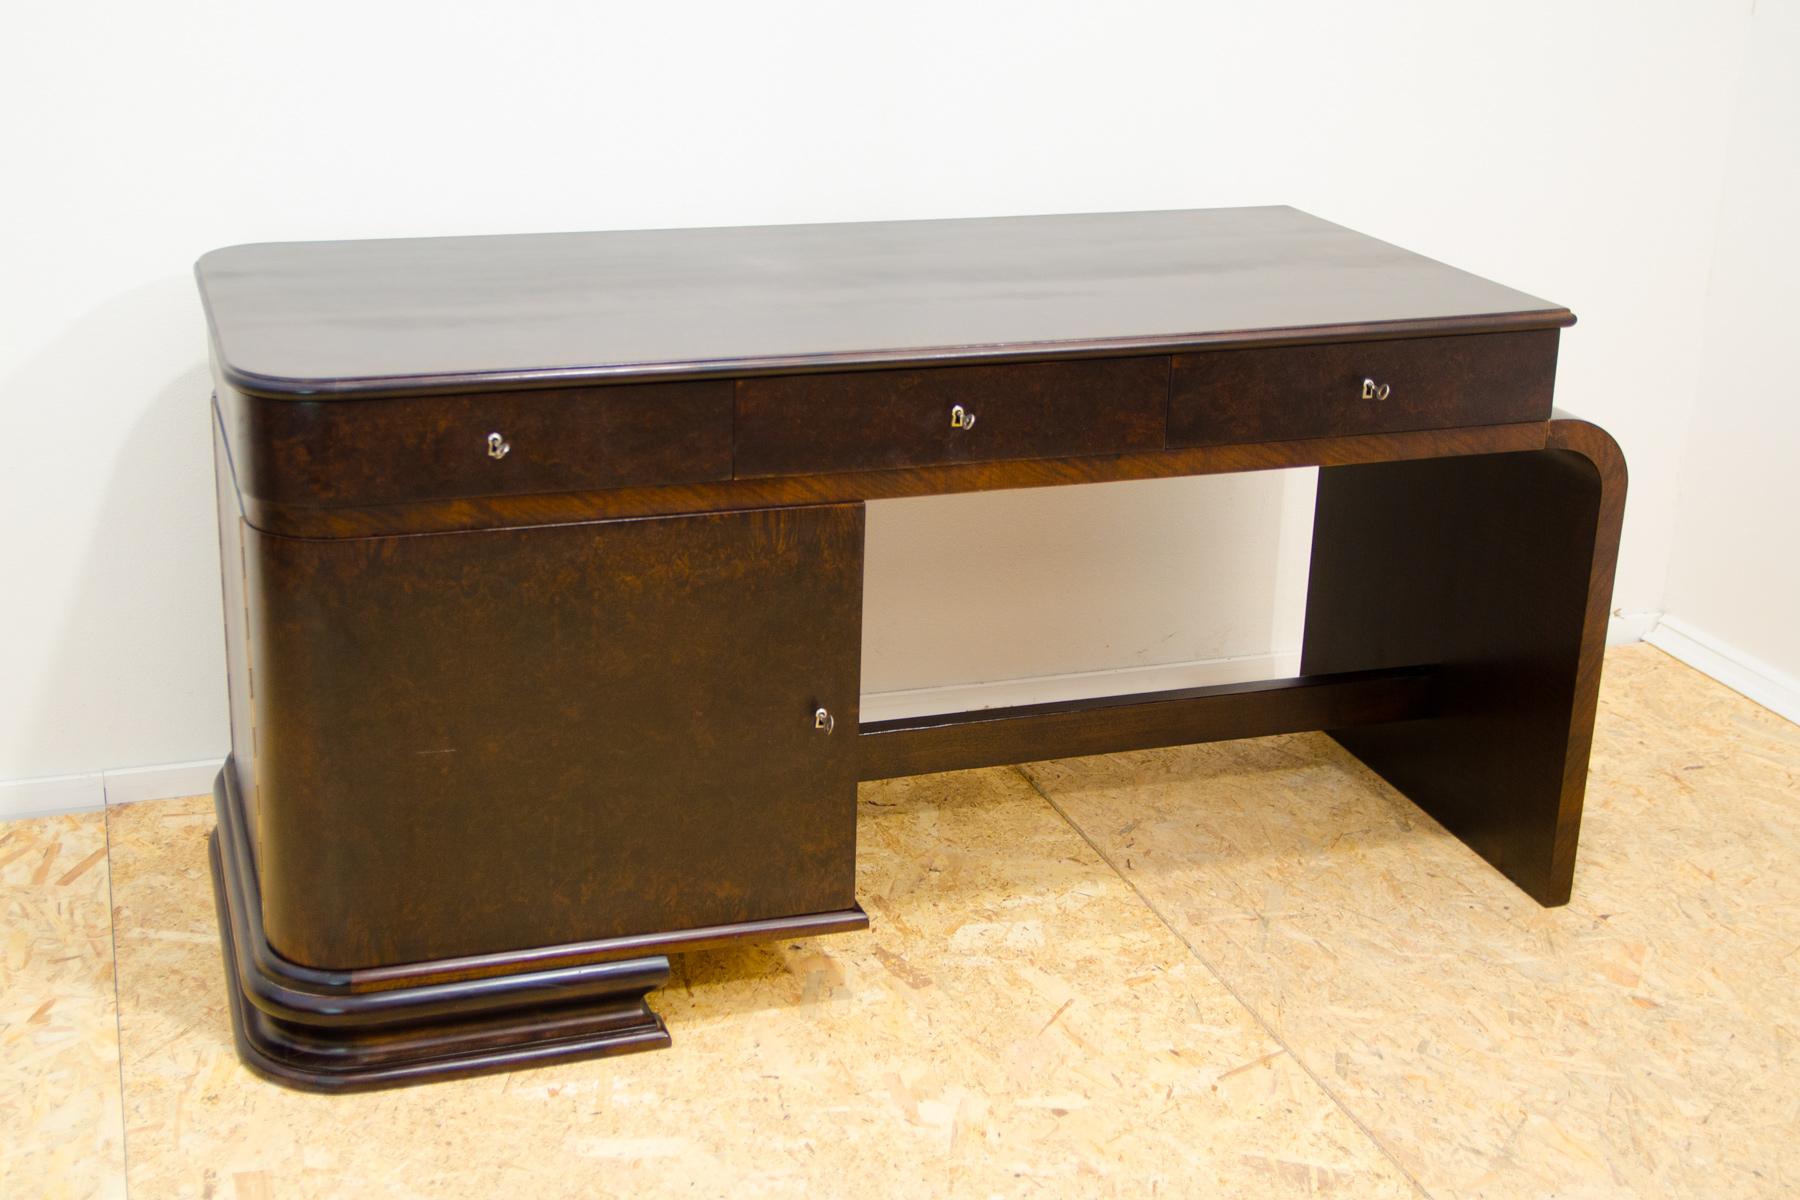 This ART DECO writing desk was made in the former Czechoslovakia in the 1930´s. The table has a simple and unconventional design typical of the ART DECO period. The table is double-sided, which means that you can easily place it in the space and it